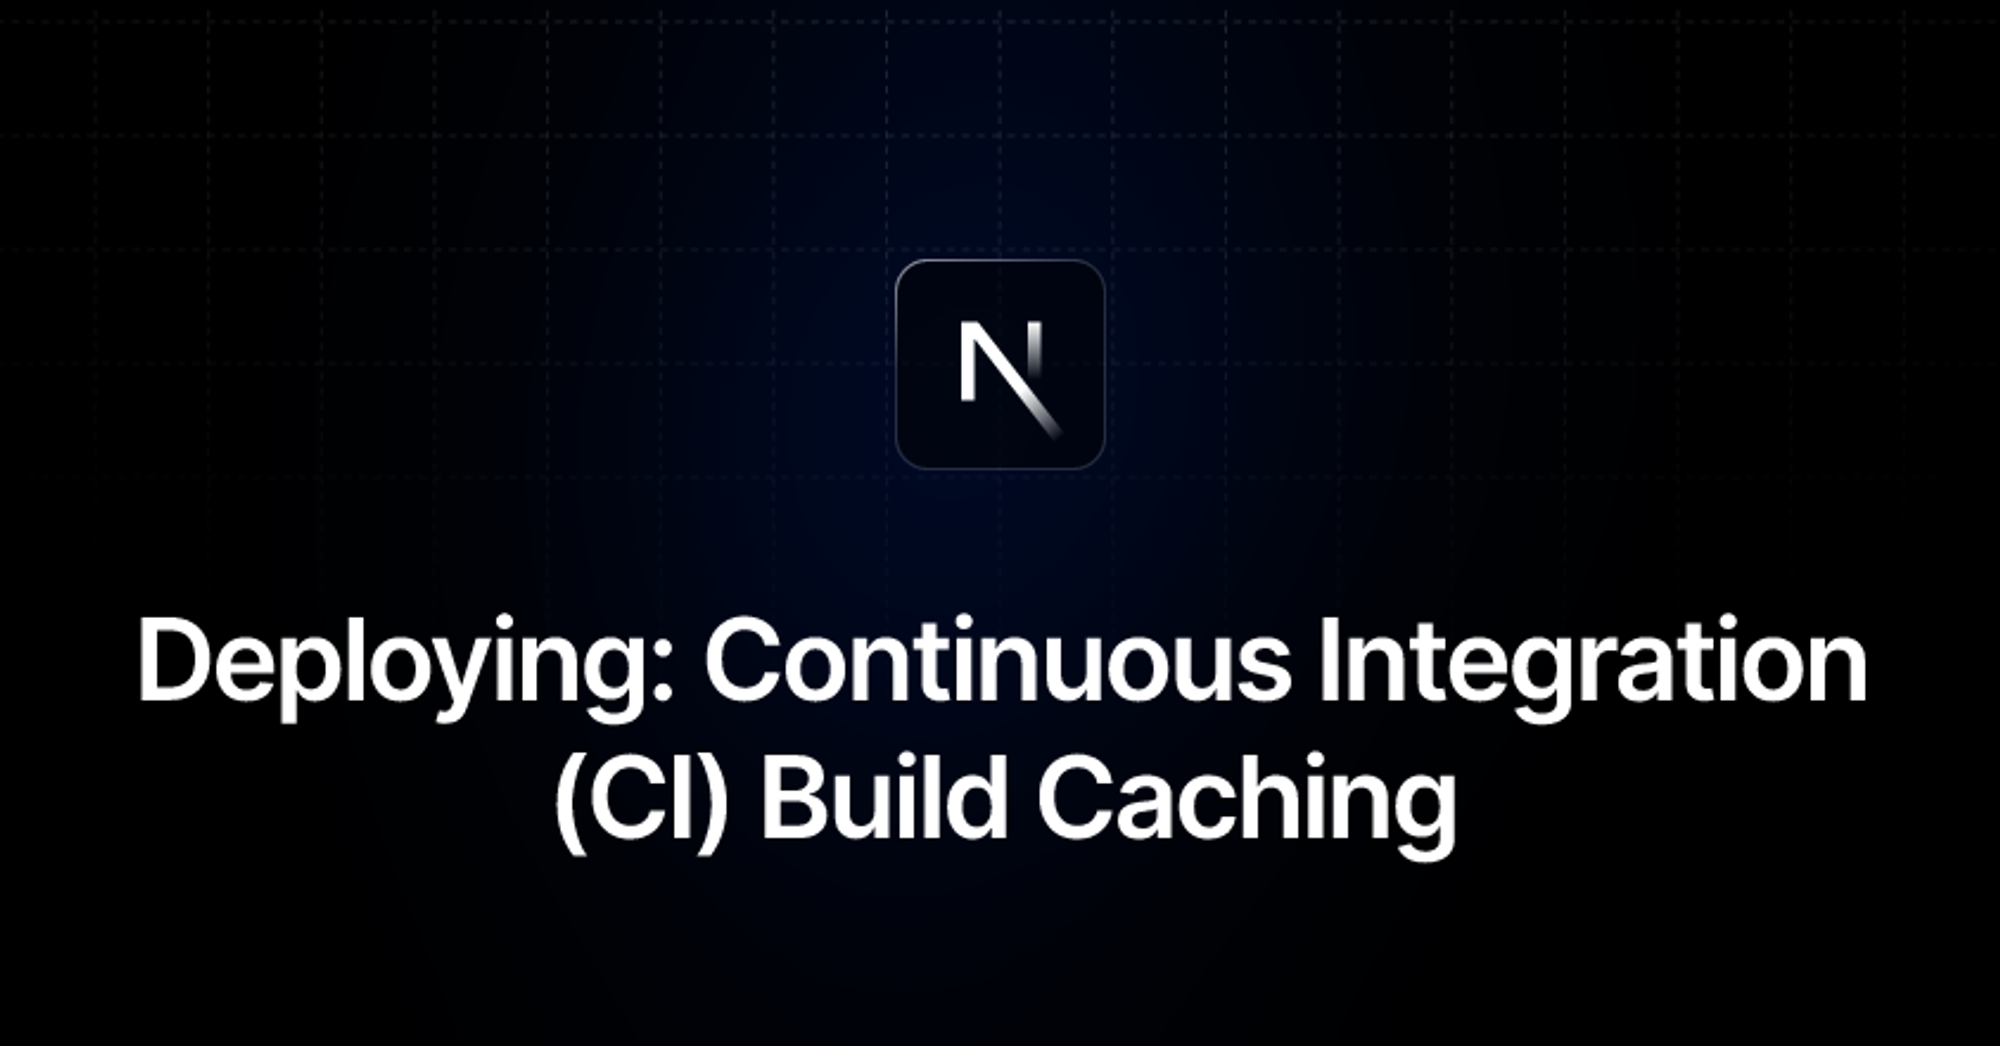 Deploying: Continuous Integration (CI) Build Caching